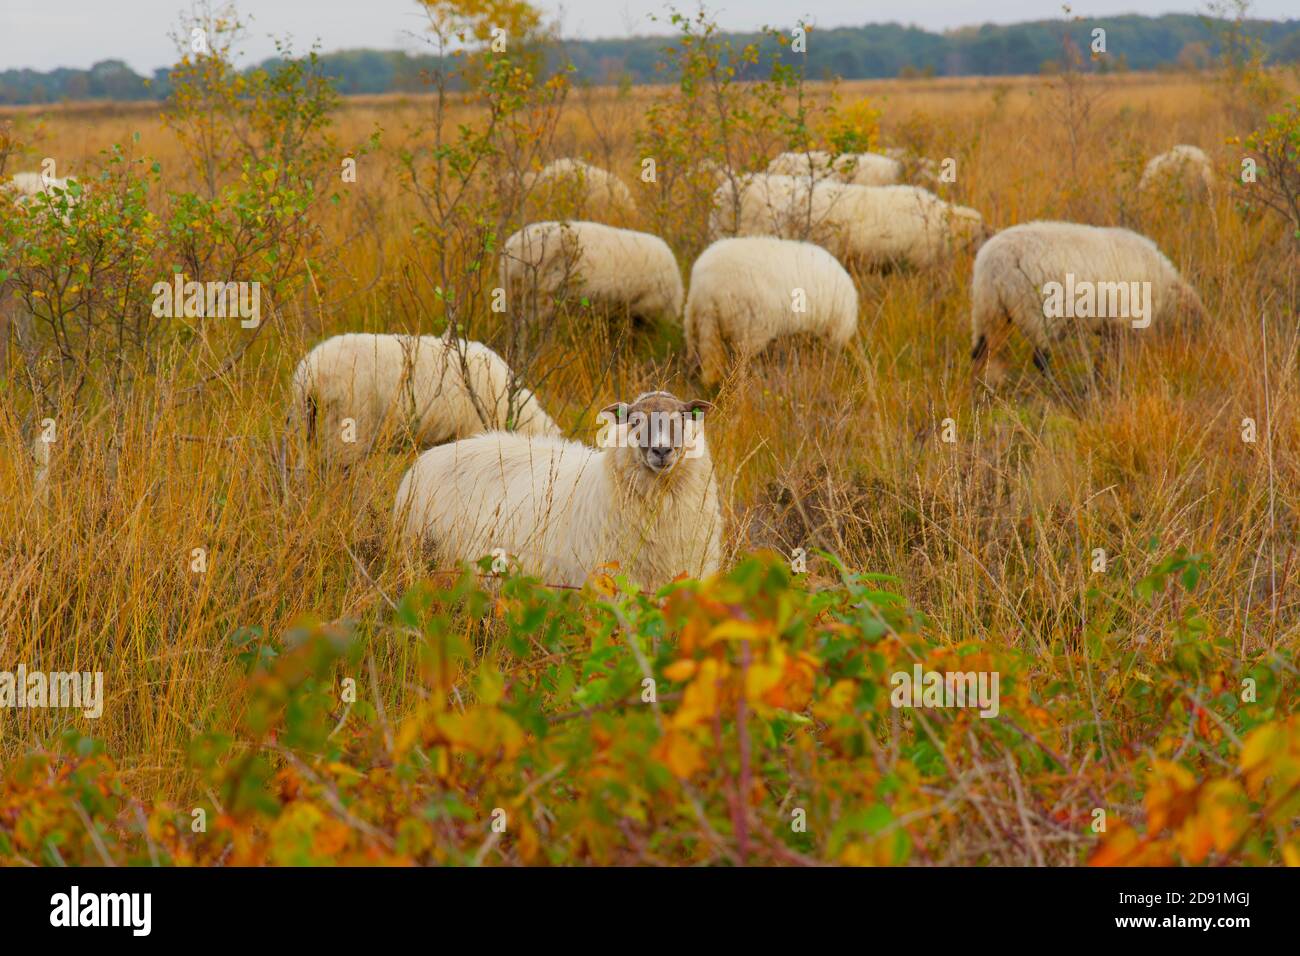 Flock of sheep grazing and walking in autumn field. Full frame, horizontal composition. Stock Photo